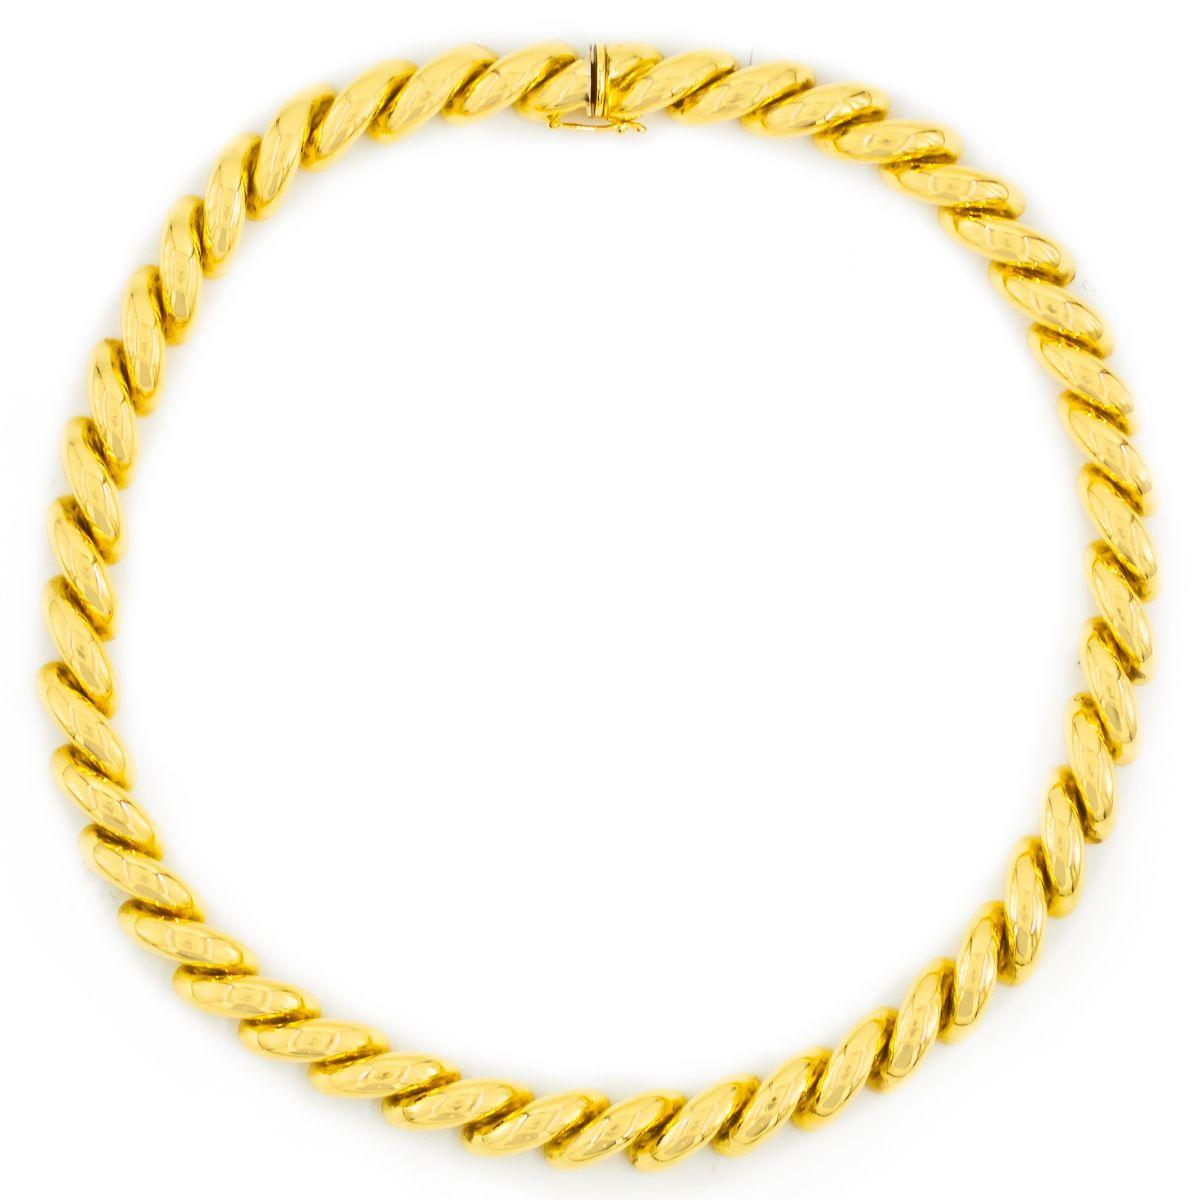 A FINE TIFFANY & CO 14K GOLD SAN-MARCO NECKLACE
Circa late 20th century  75.9 grams total weight  in a brilliant bright-polish surface
Item # 112LGS10S

An incredibly fine necklace by Tiffany & Co executed entirely in 14 karat yellow gold, it